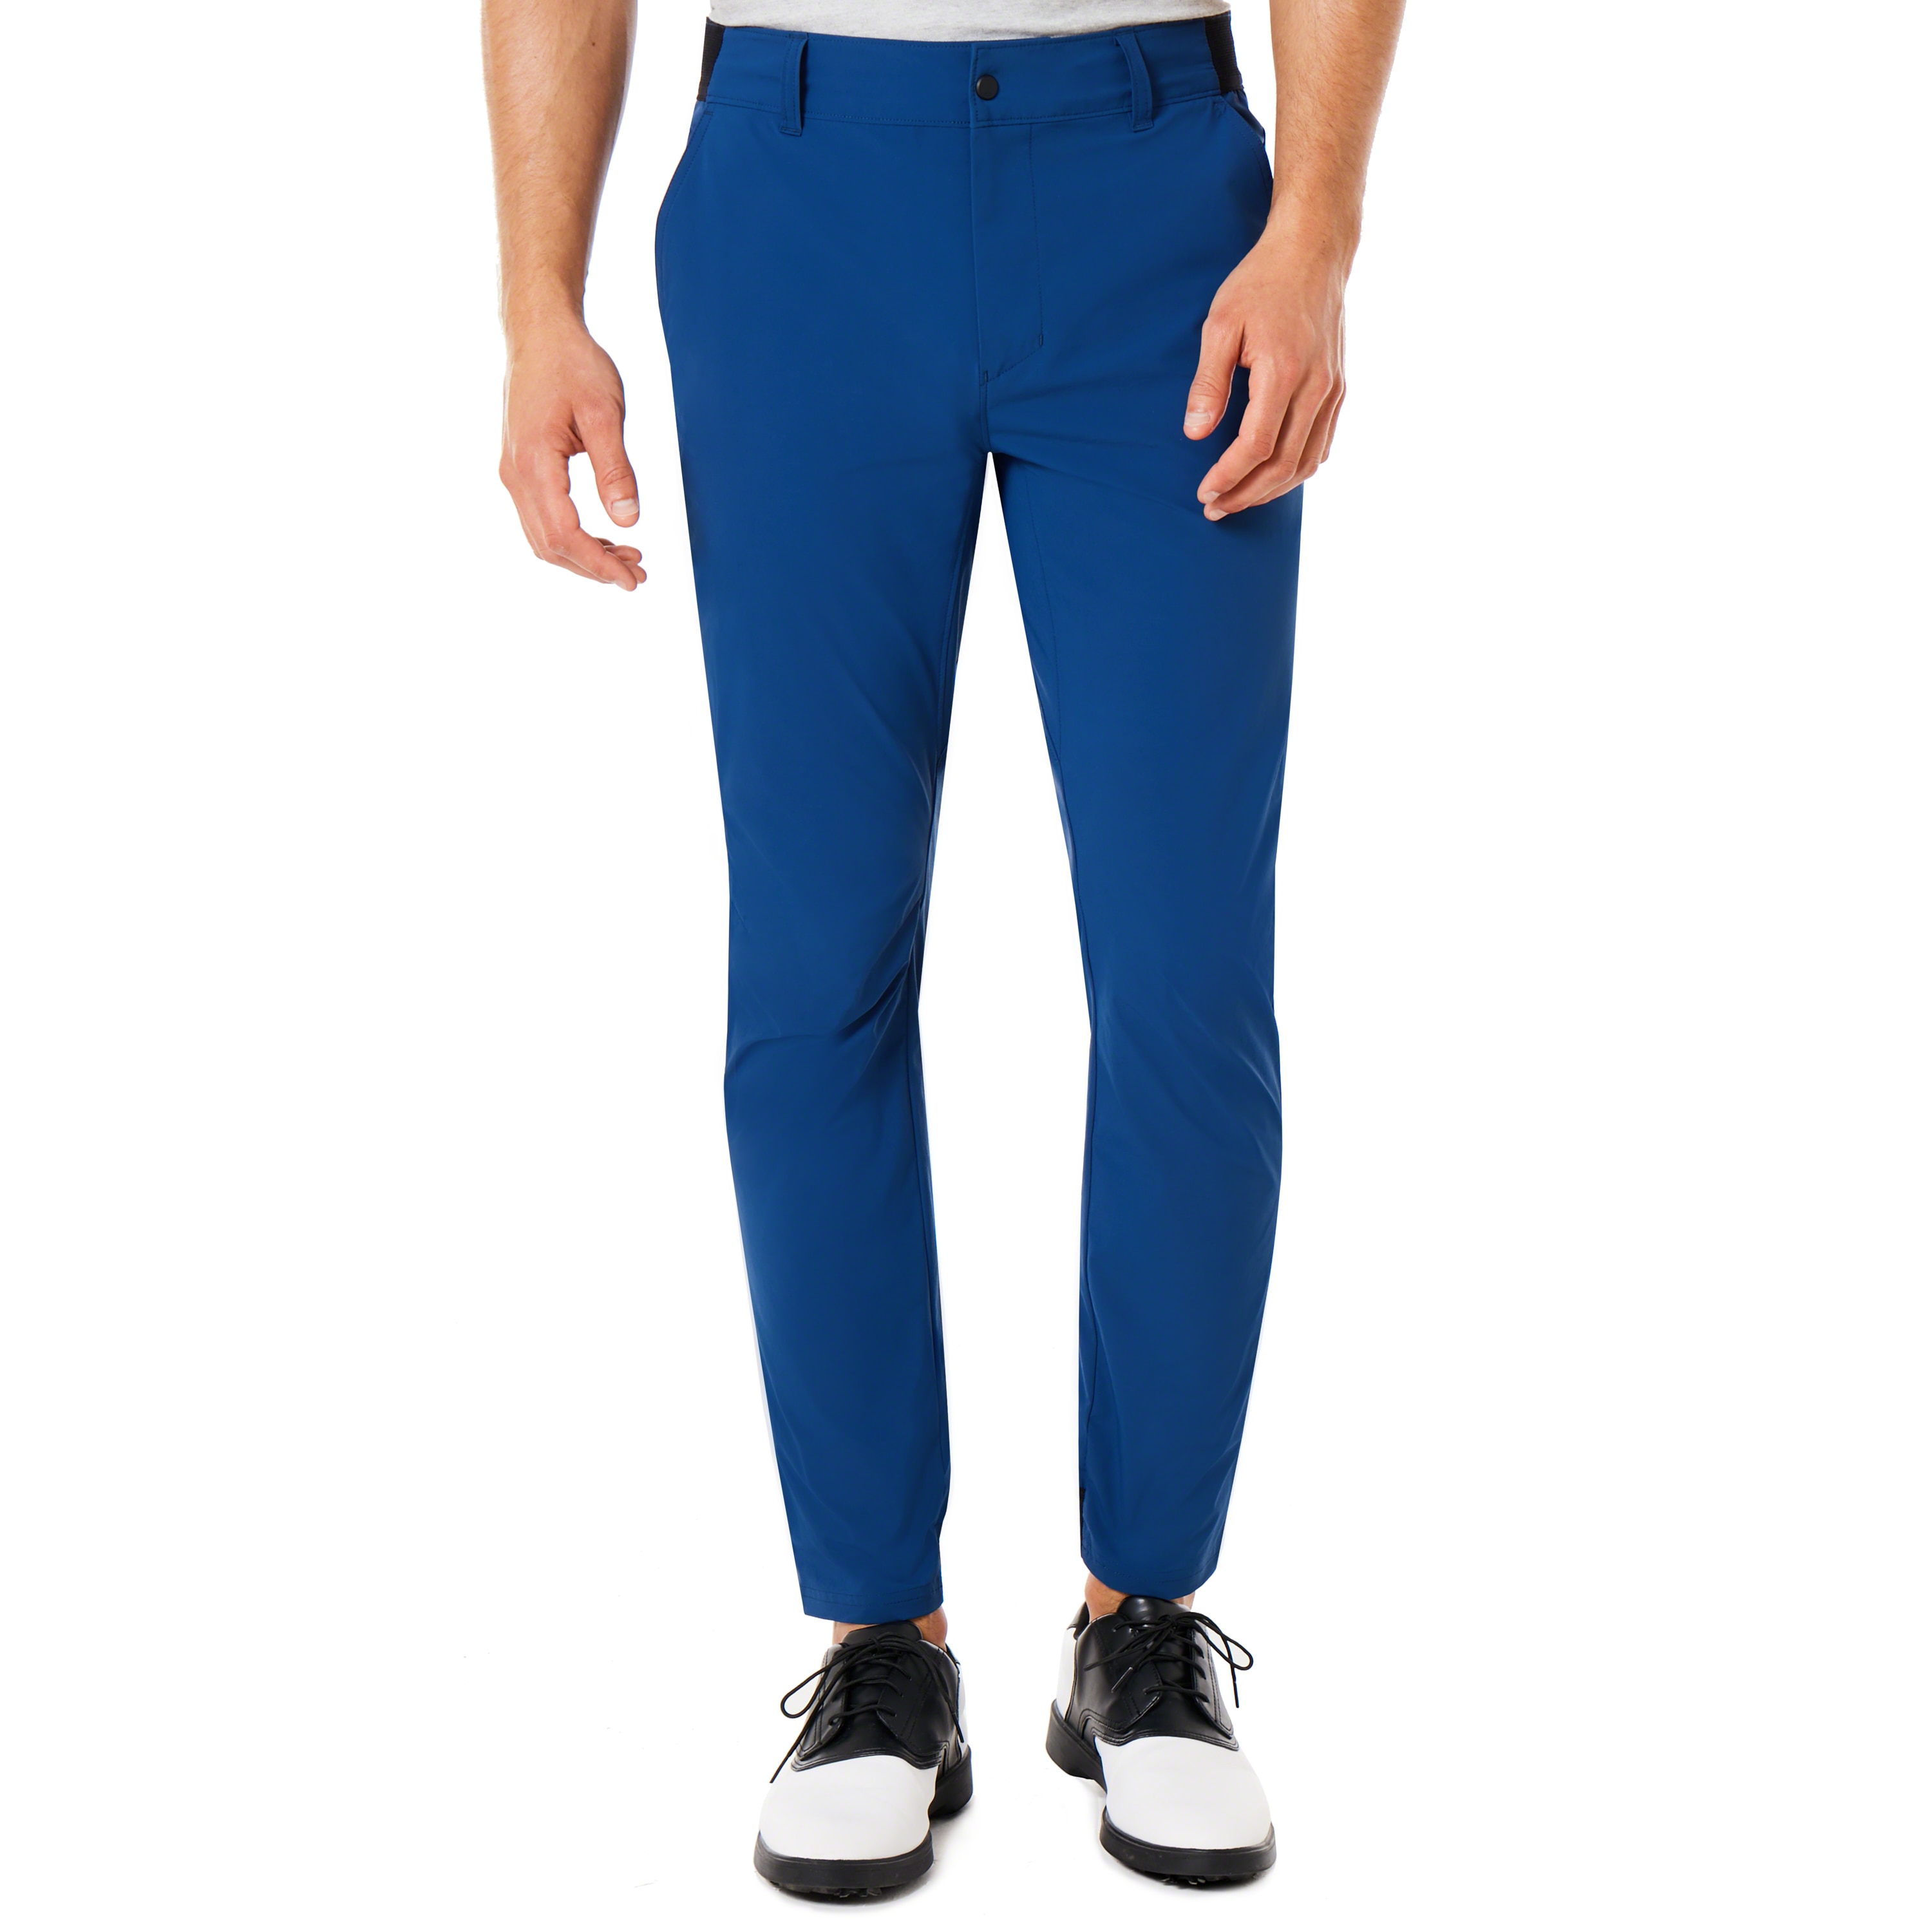 blue tapered pants